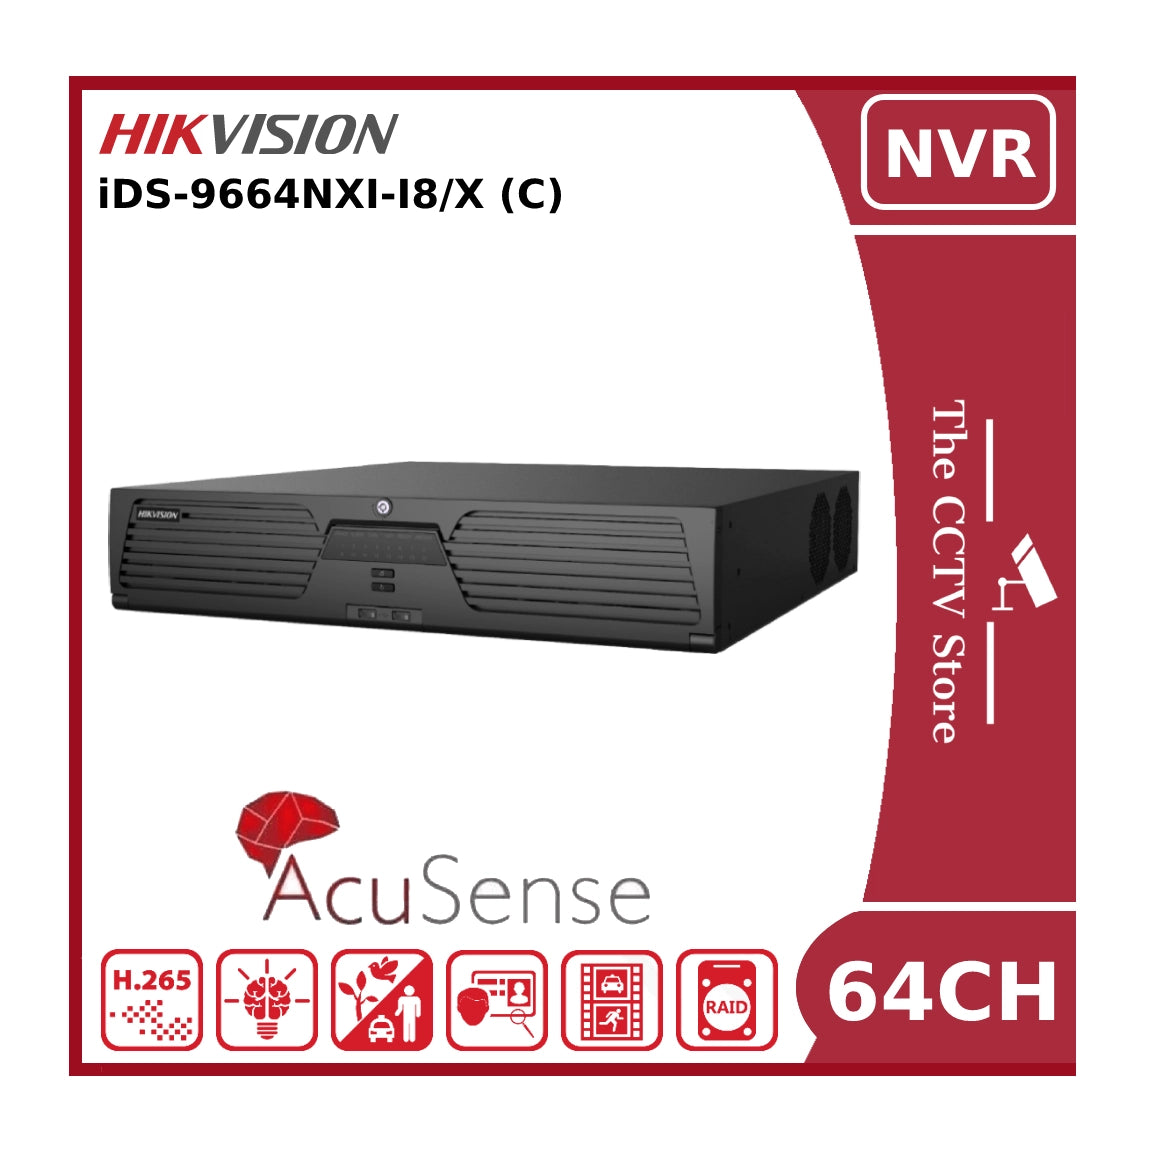 Hikvision iDS-9664NXI-I8/X 64 Channel Non-PoE 12MP 4K DeepinMind NVR With AcuSense & 8 HDD Bays